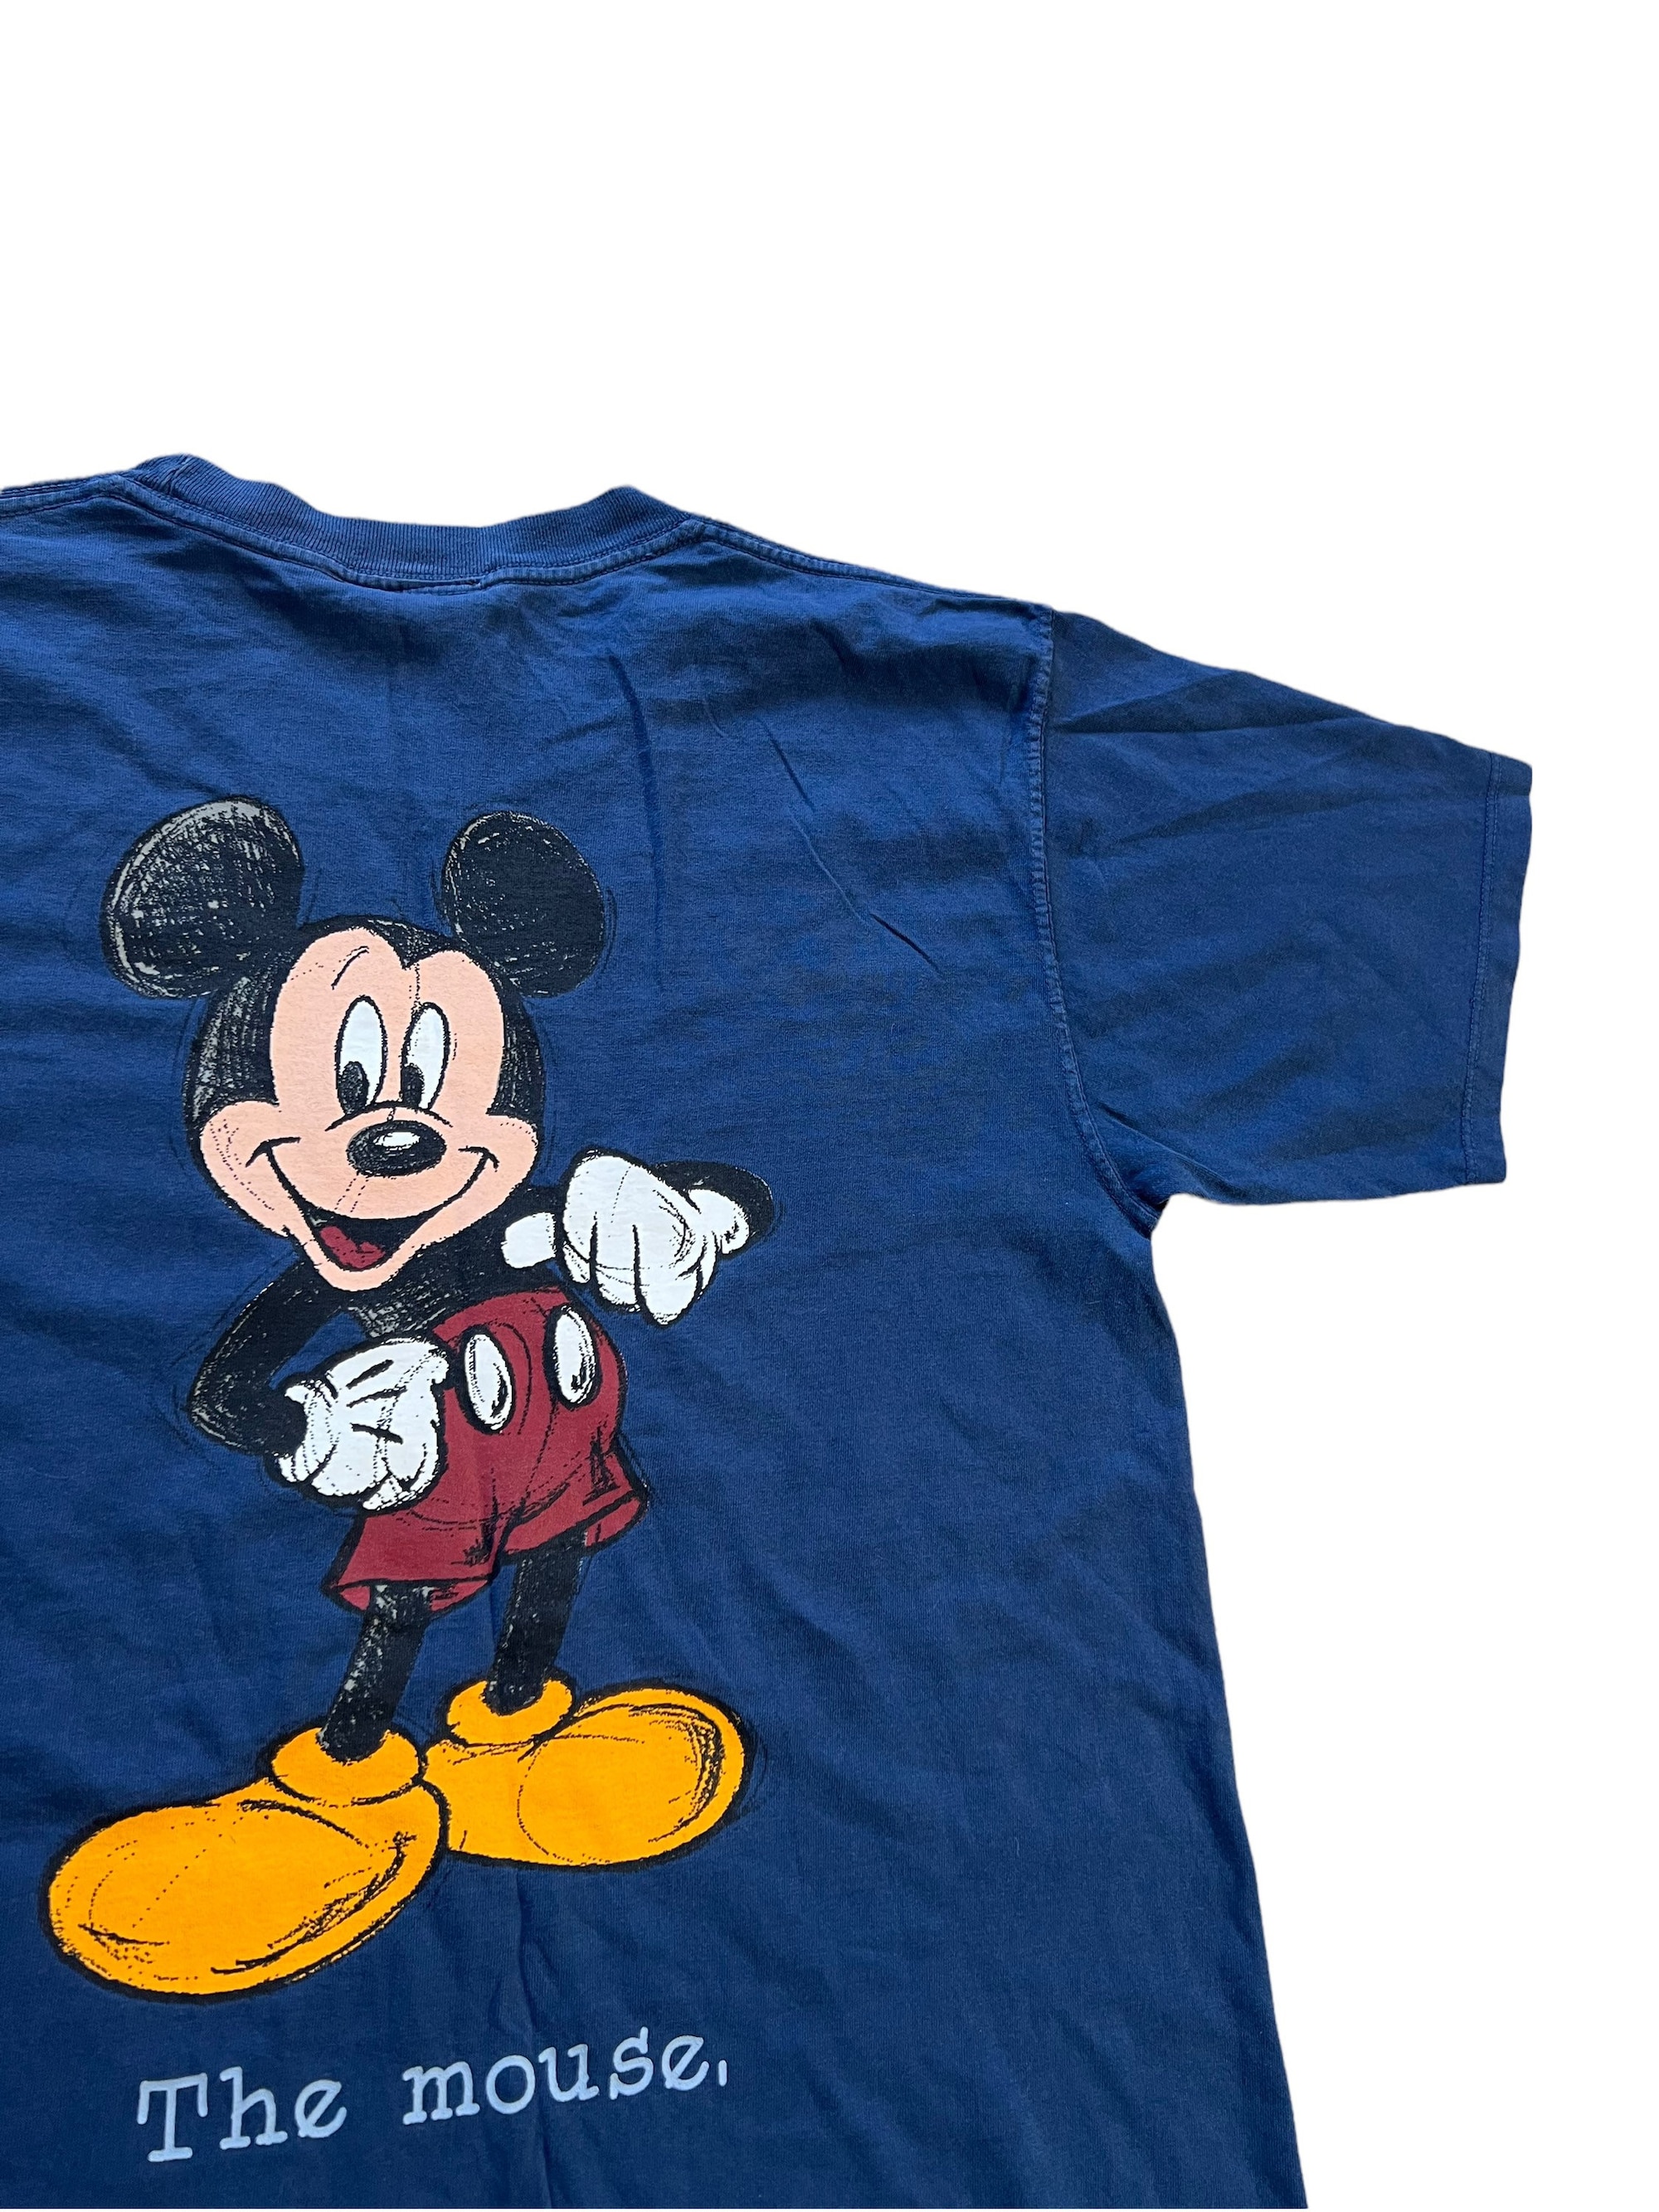 Discover Vintage 90s Mickey Mouse T-Shirt, Disneyland